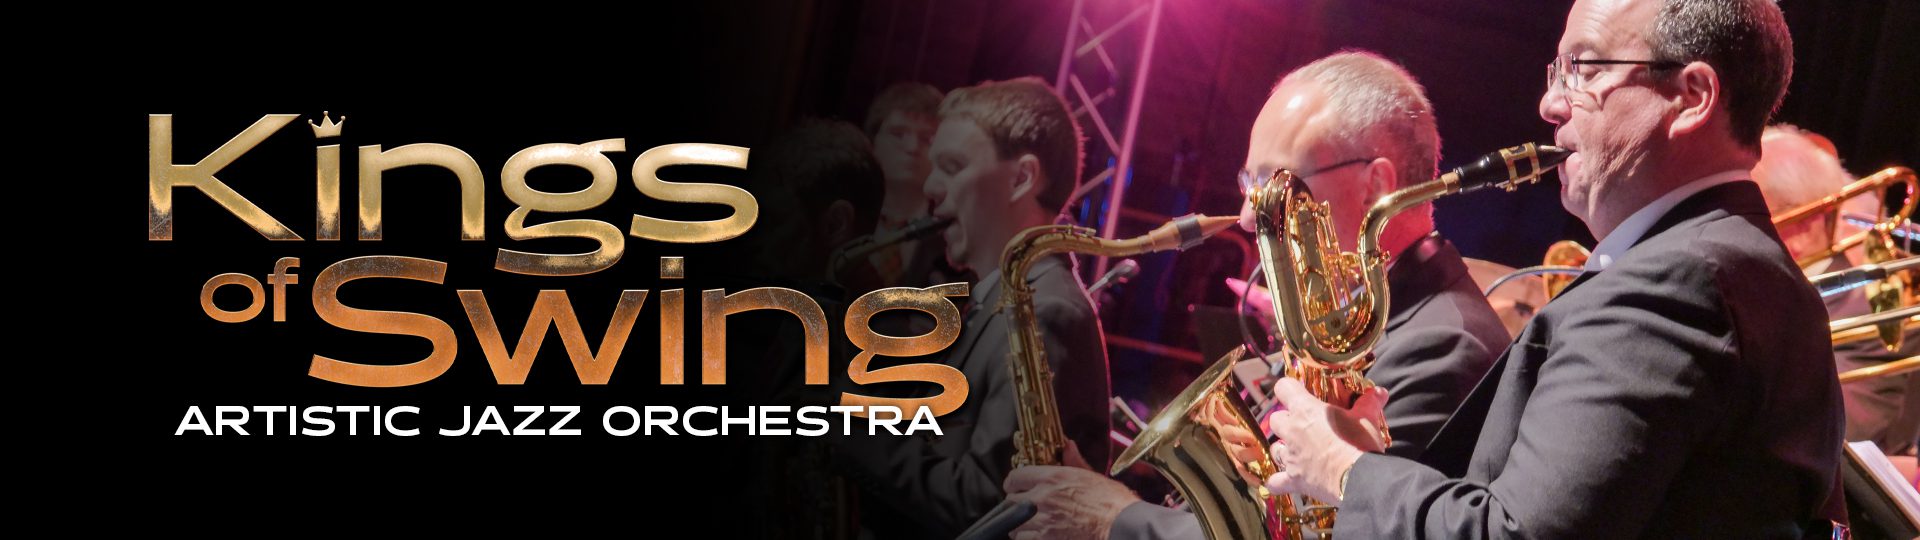 Artistic Jazz Orchestra: Kings of Swing